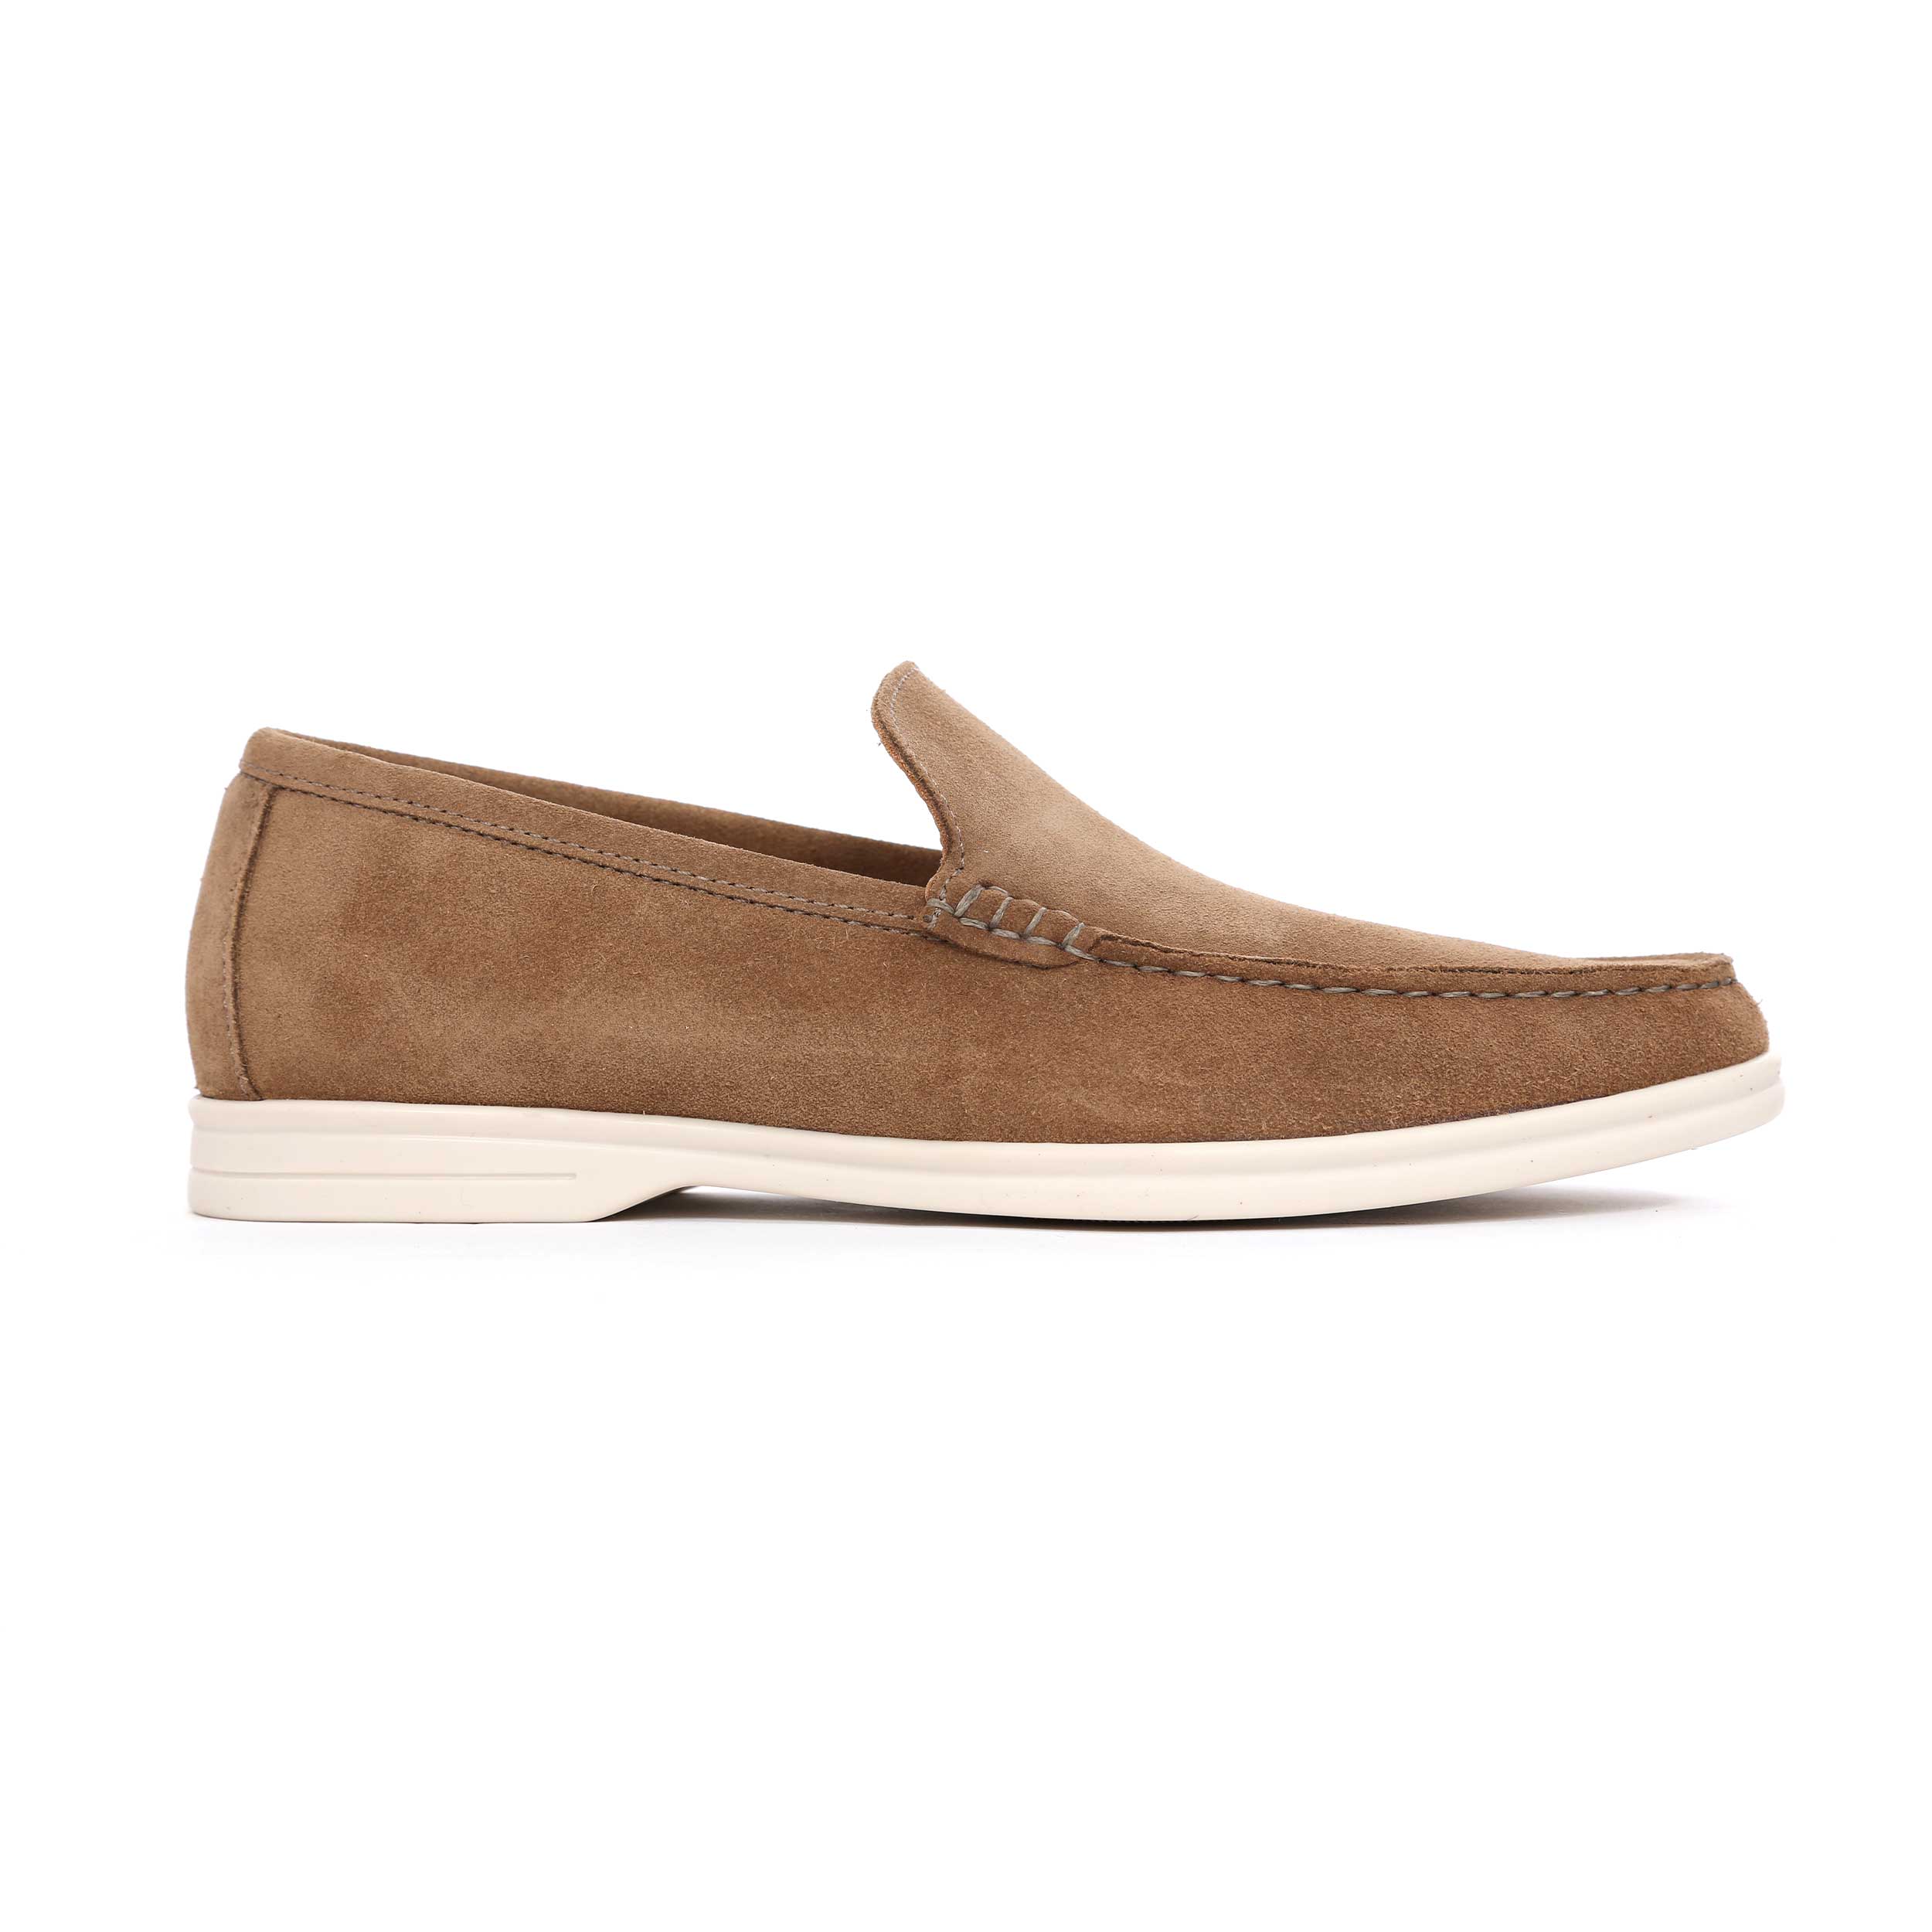 Oliver Sweeney Alicante Shoe in Taupe